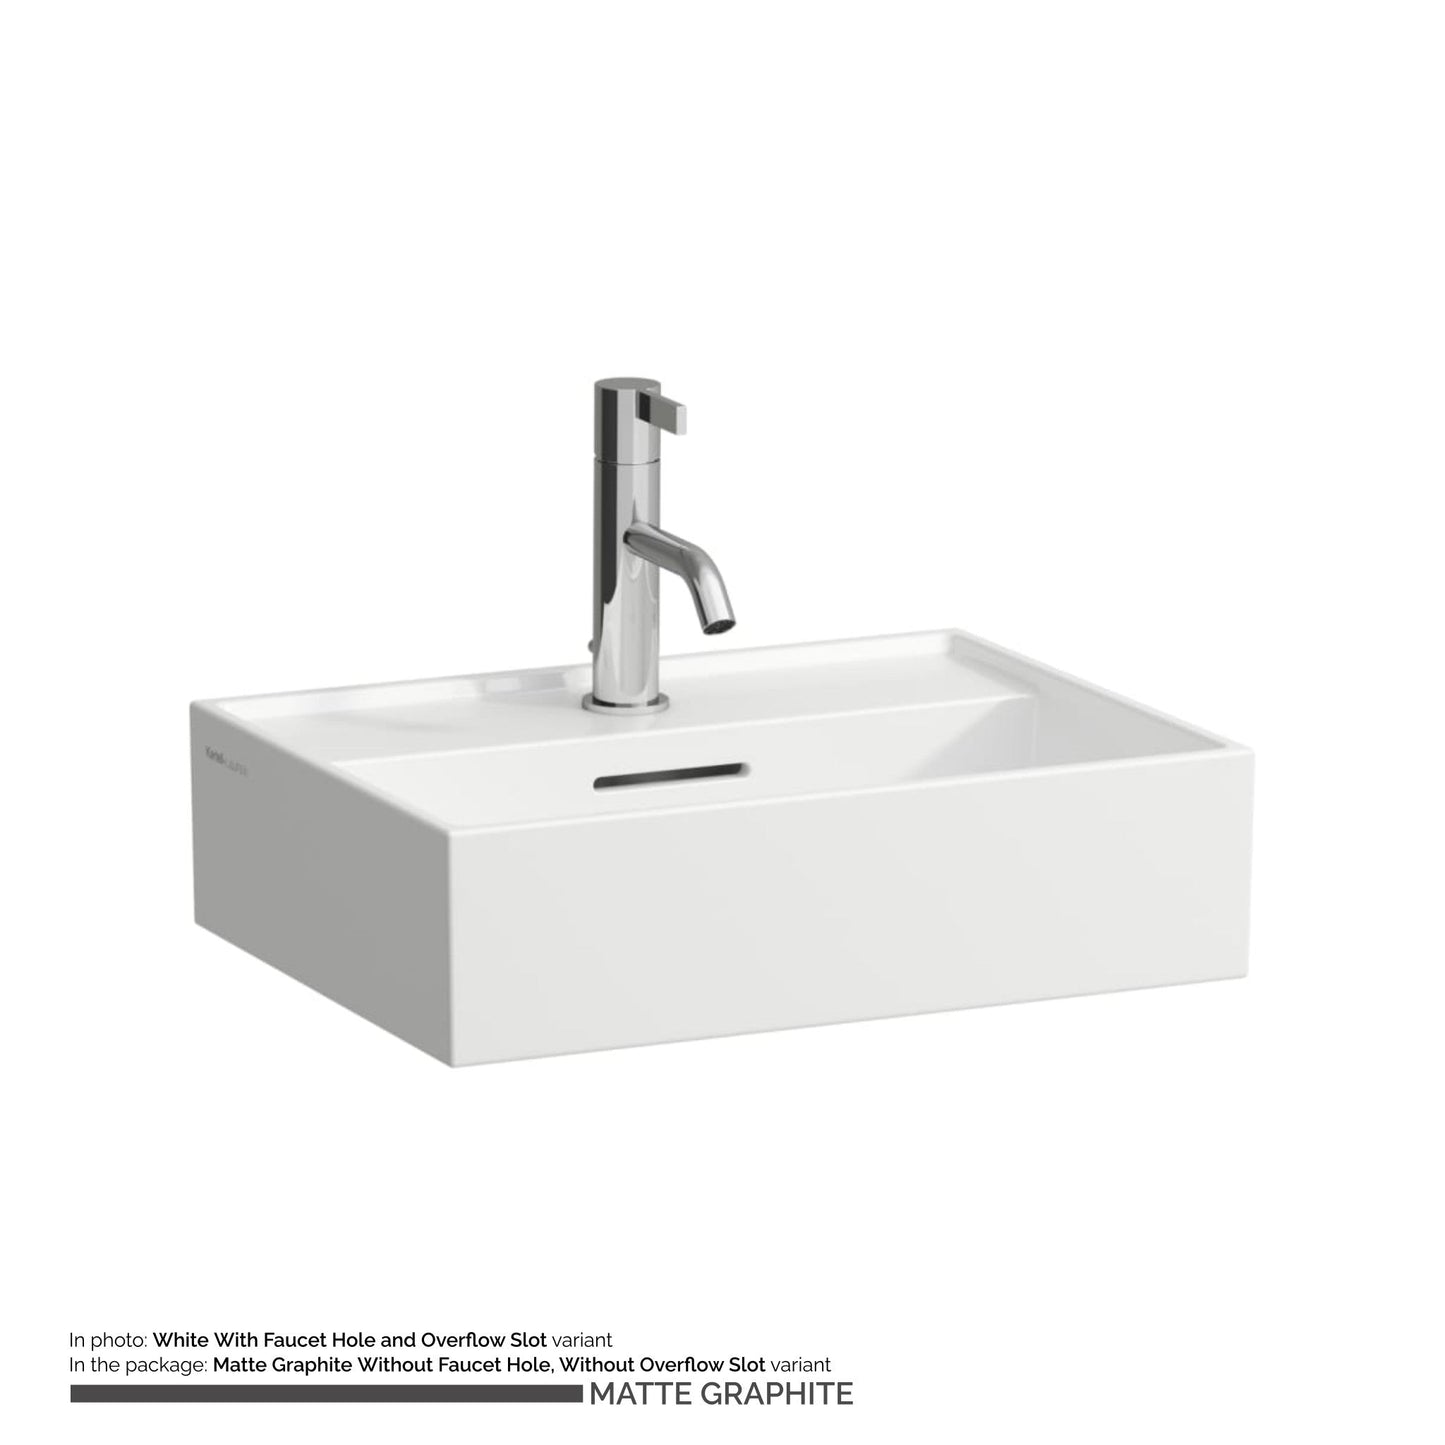 Laufen Kartell 18" x 13" Matte Graphite Countertop Bathroom Sink Without Faucet Hole